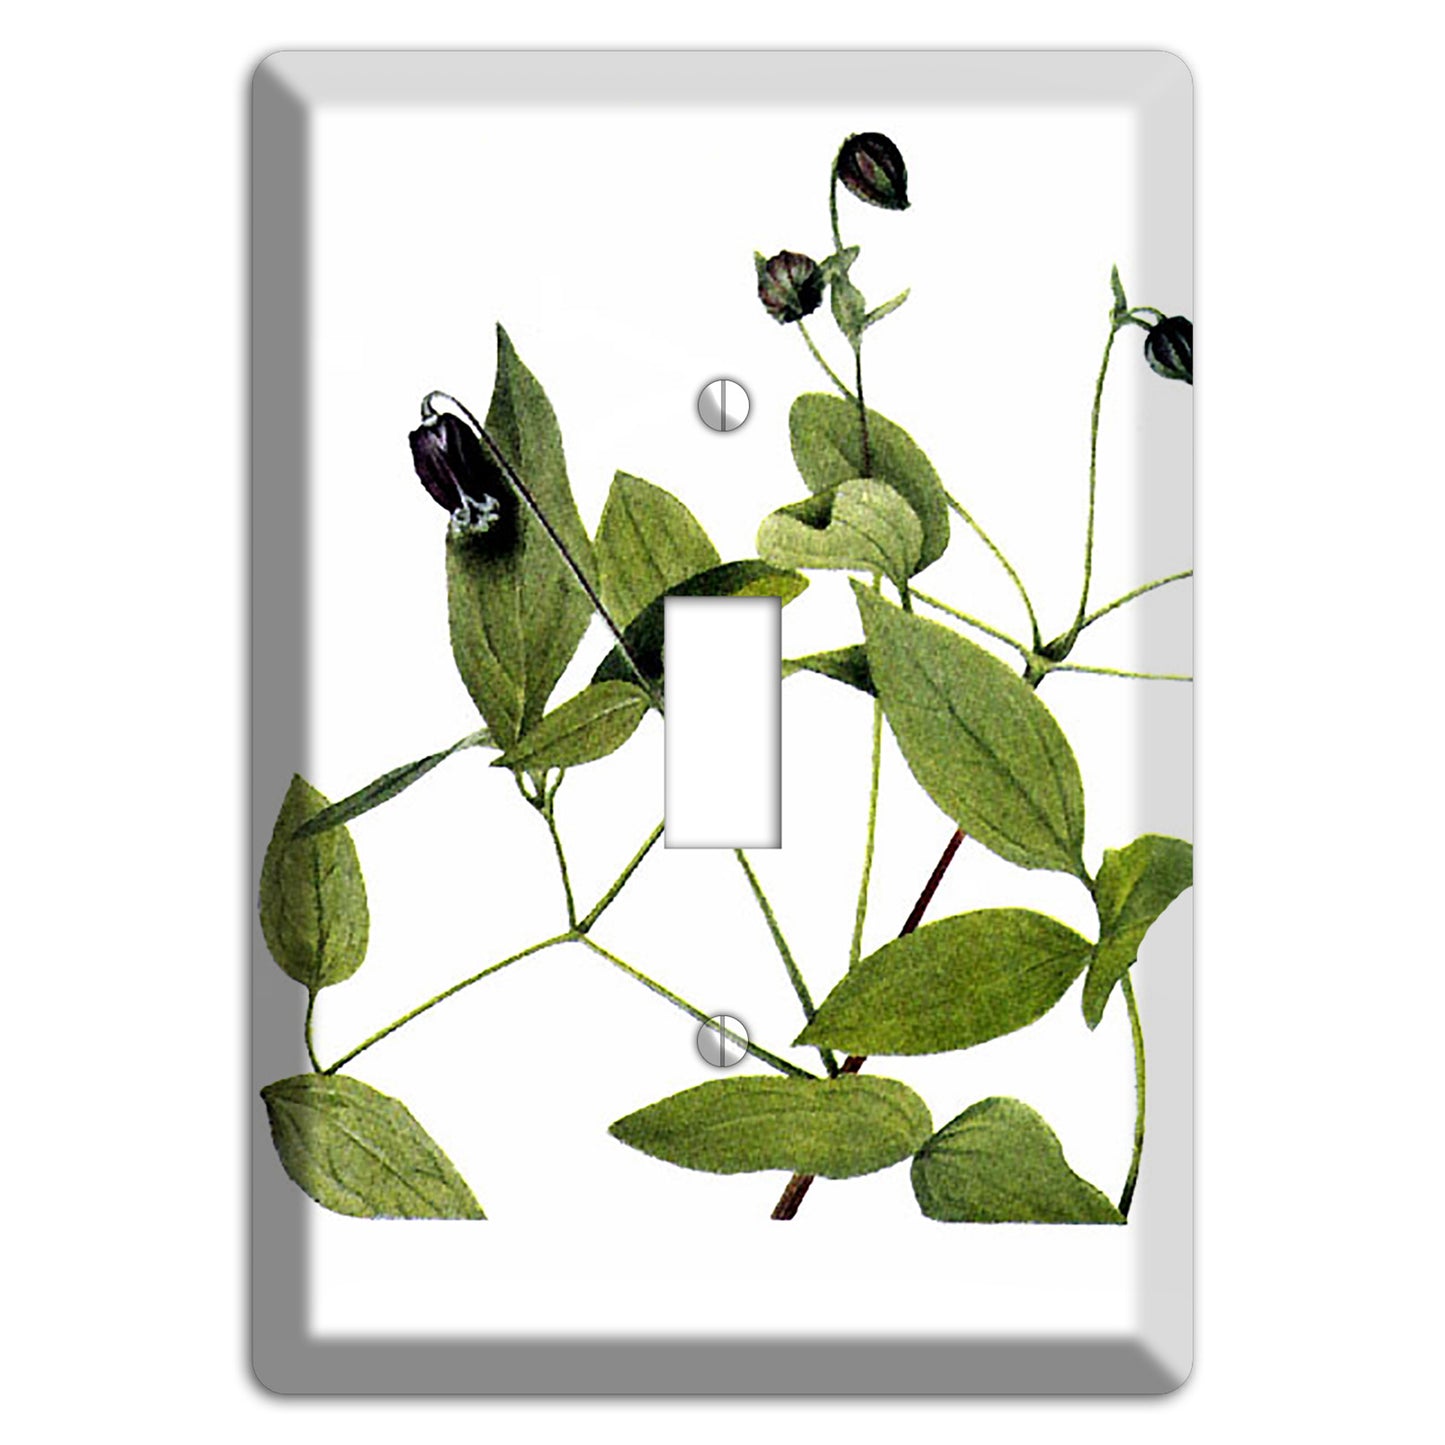 Clematis Viorna Cover Plates